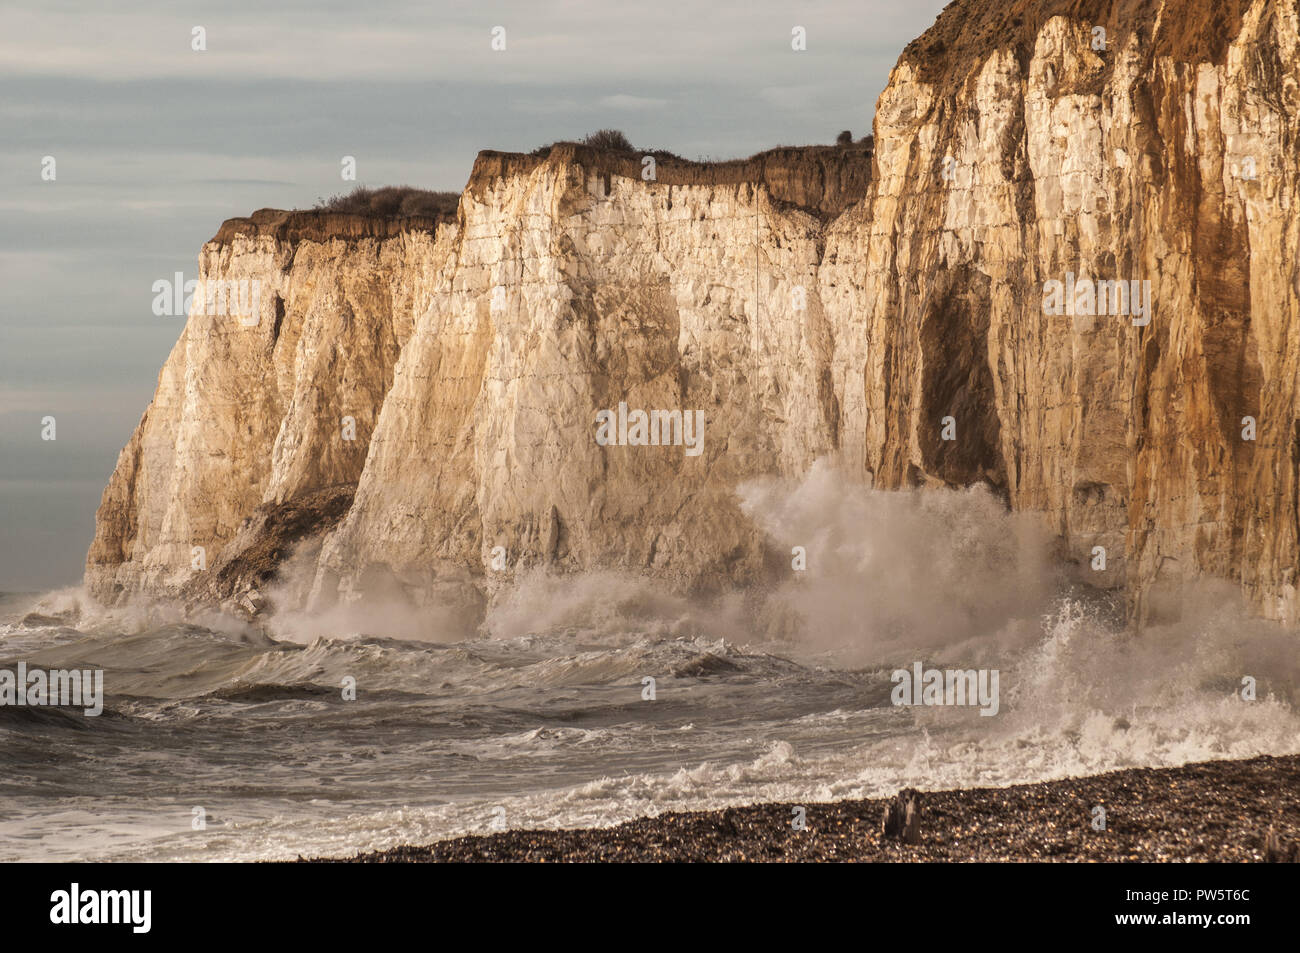 Newhaven, East Sussex, UK. 12 October 2018..There have also been new rock falls at Newhaven cliffs as erosion continues on the South Coast chalk cliffs. Stock Photo